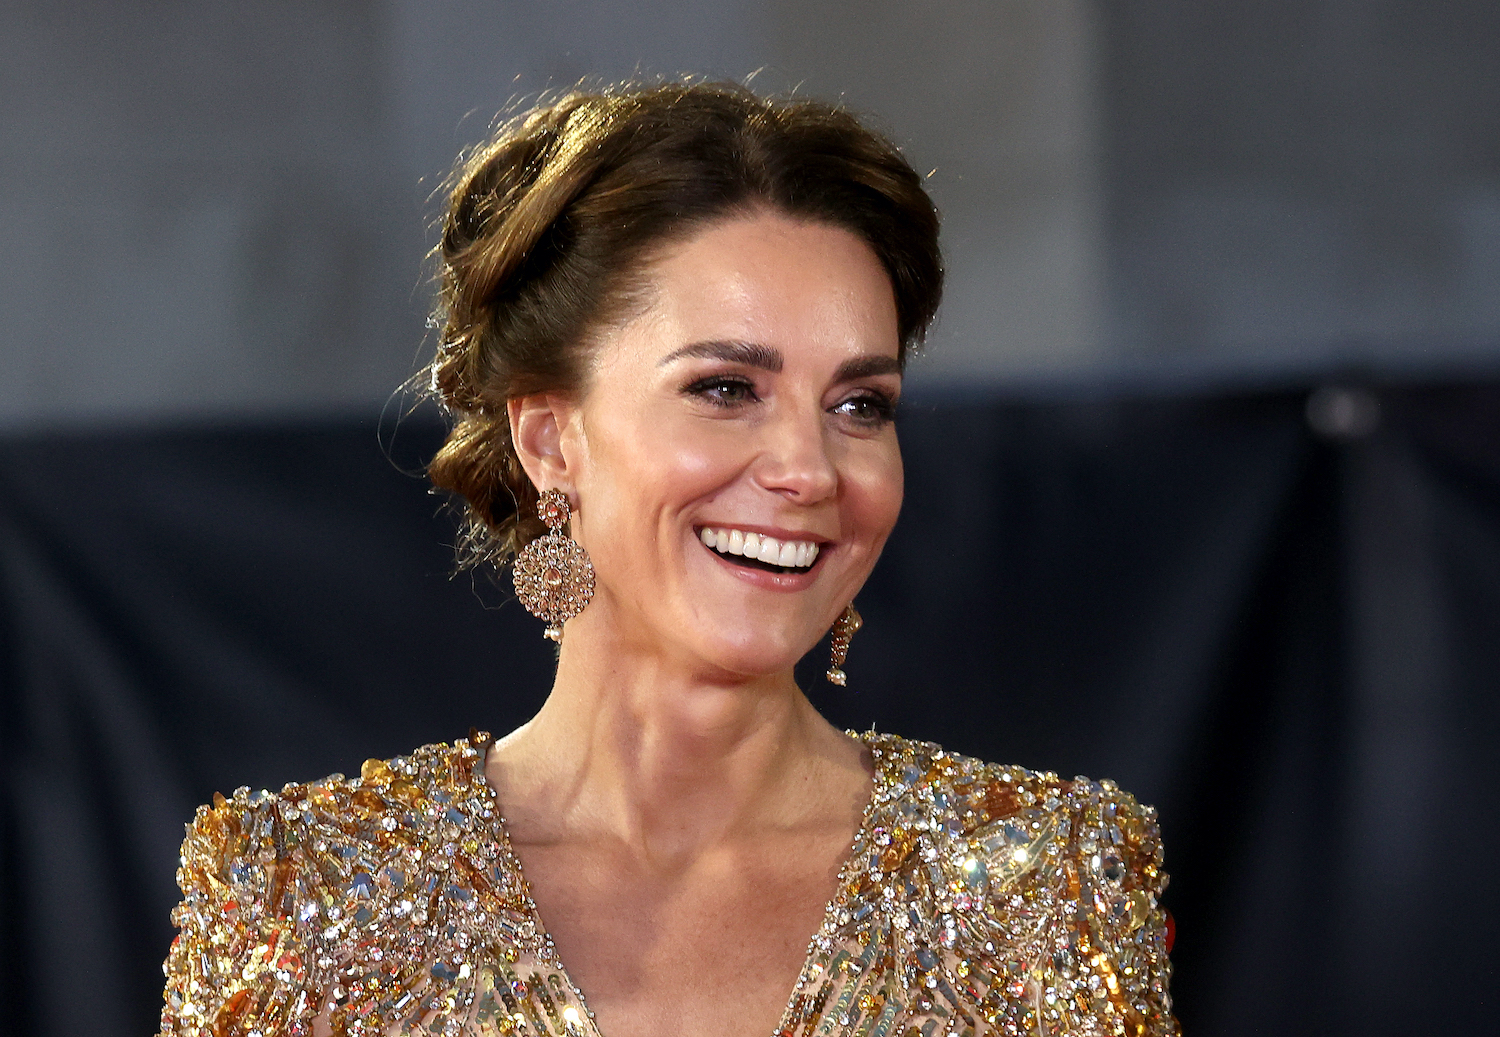 Kate Middleton wears a gold dress and smiles with her hair in an updo at the 'No Time To Die' premiere in 2021